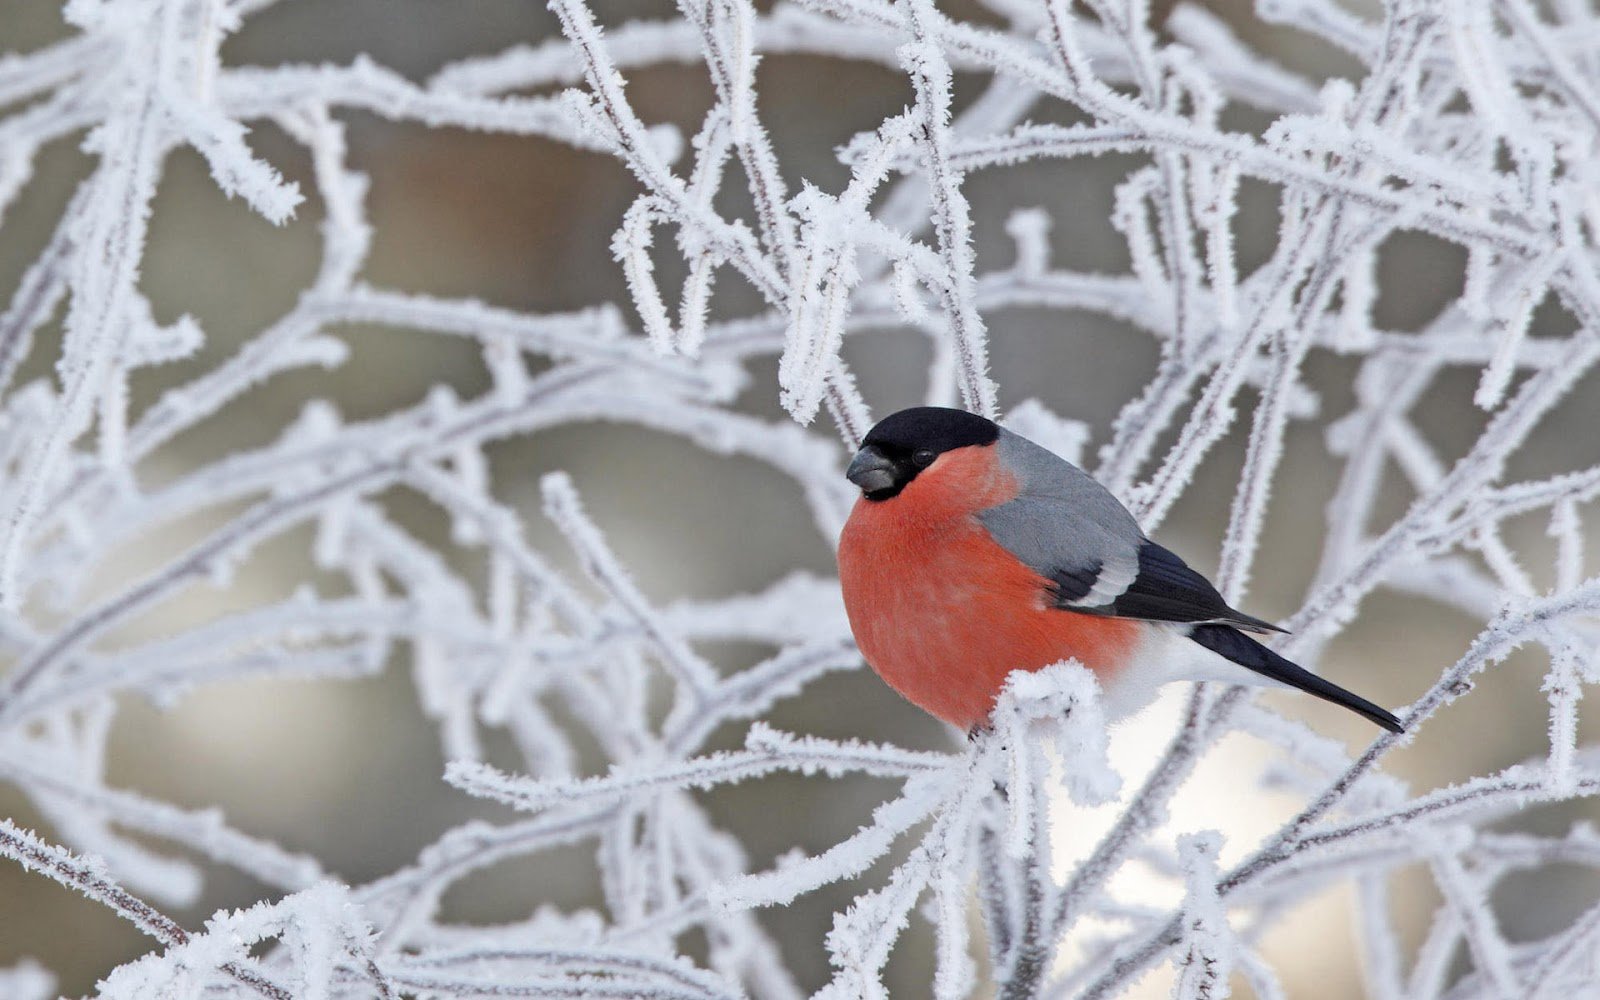 hd bird wallpaper with a red bird in a tree with snow or ice hd birds